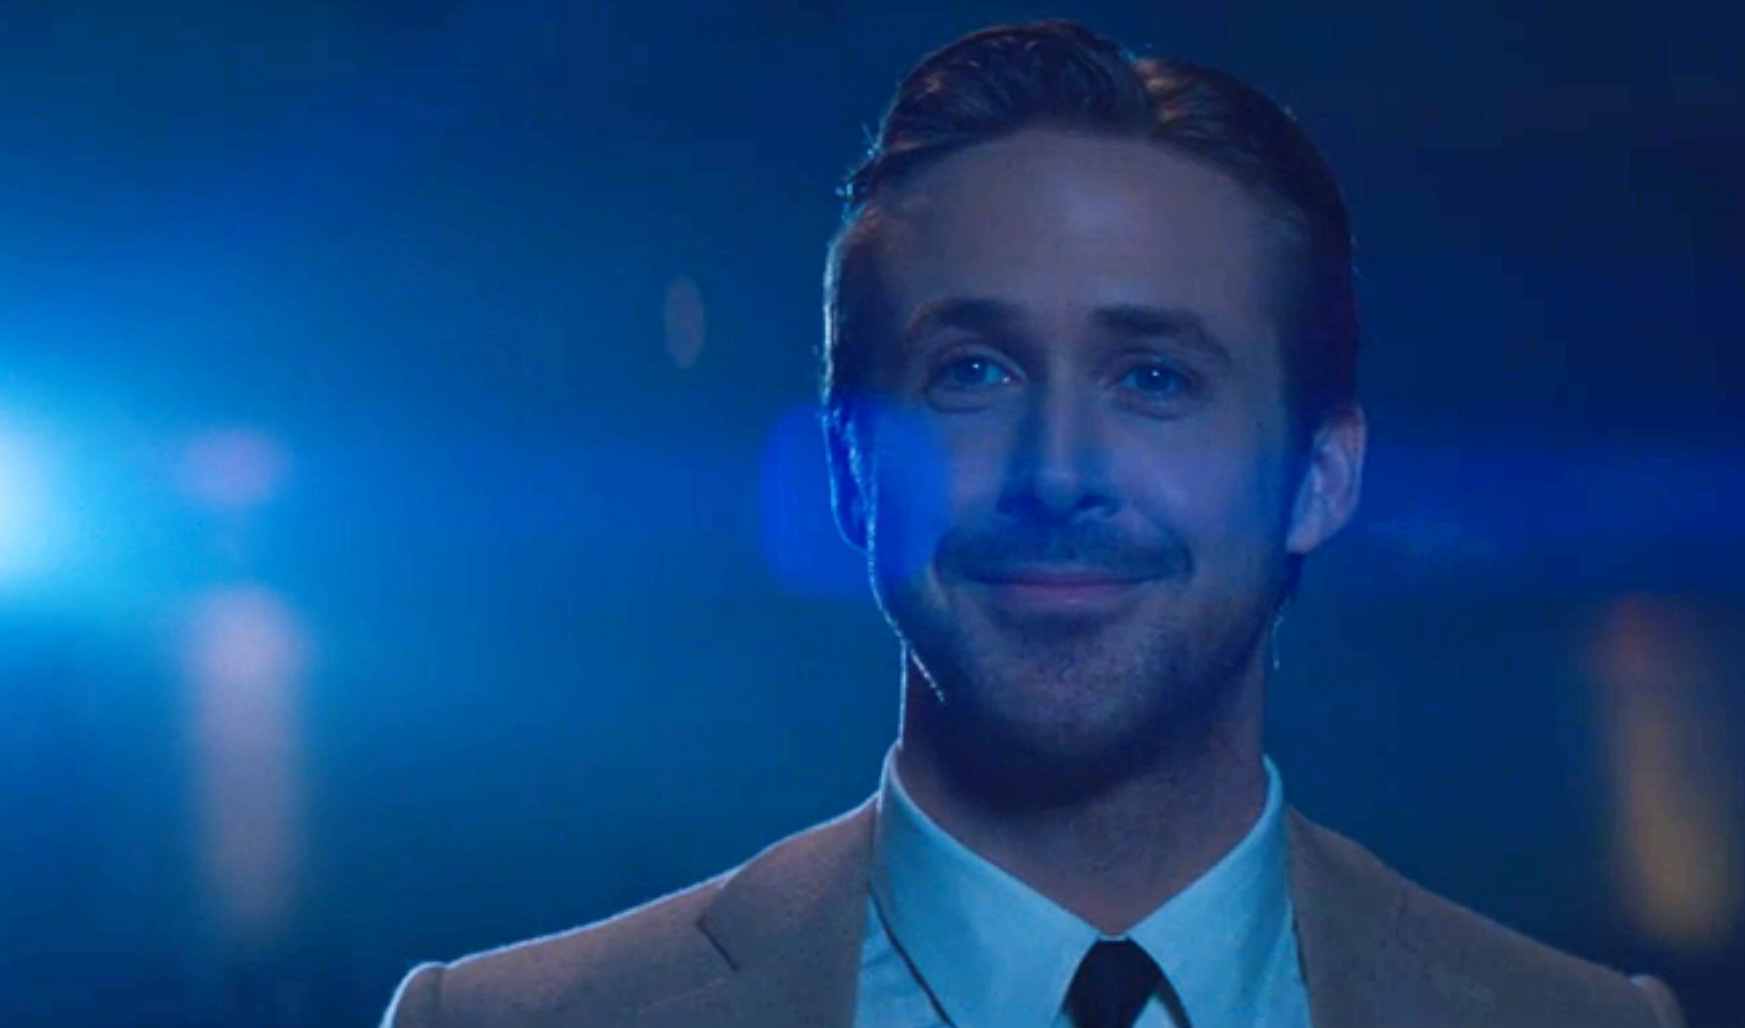 6. "Ryan Gosling's Haircut in La La Land: A Step-by-Step Guide" - wide 8